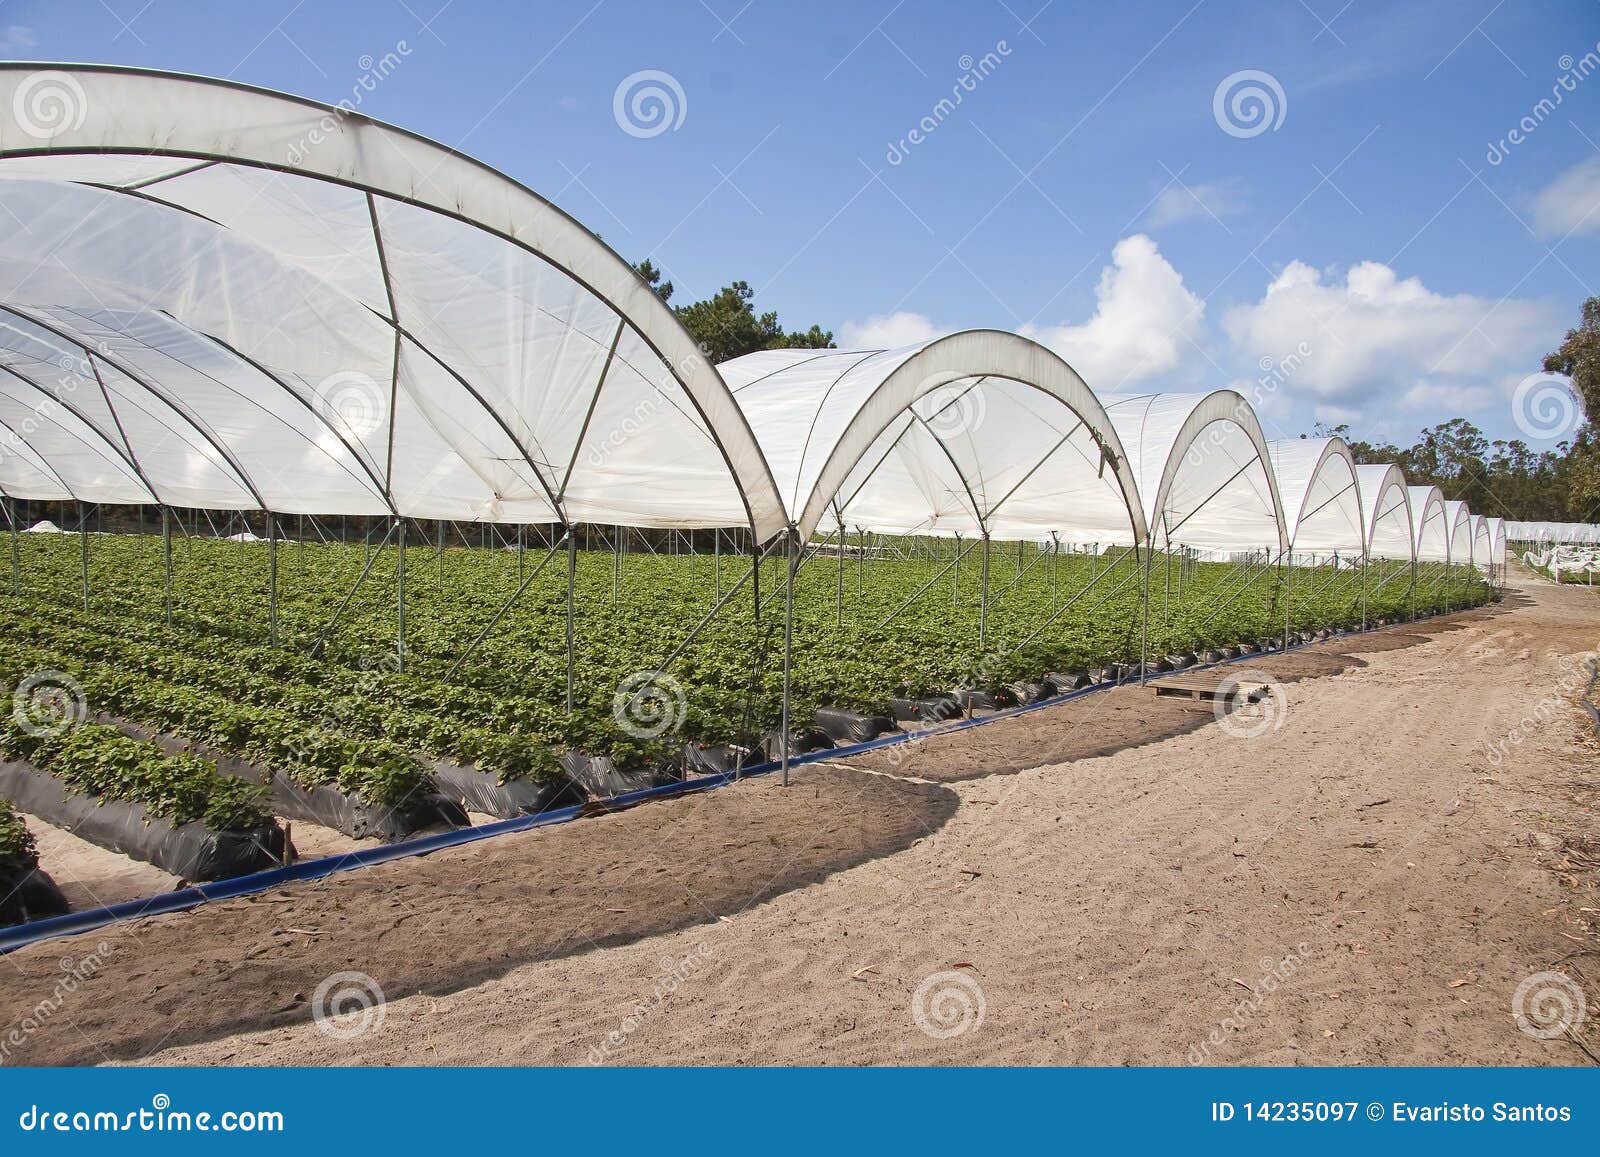 greenhouse production agriculture